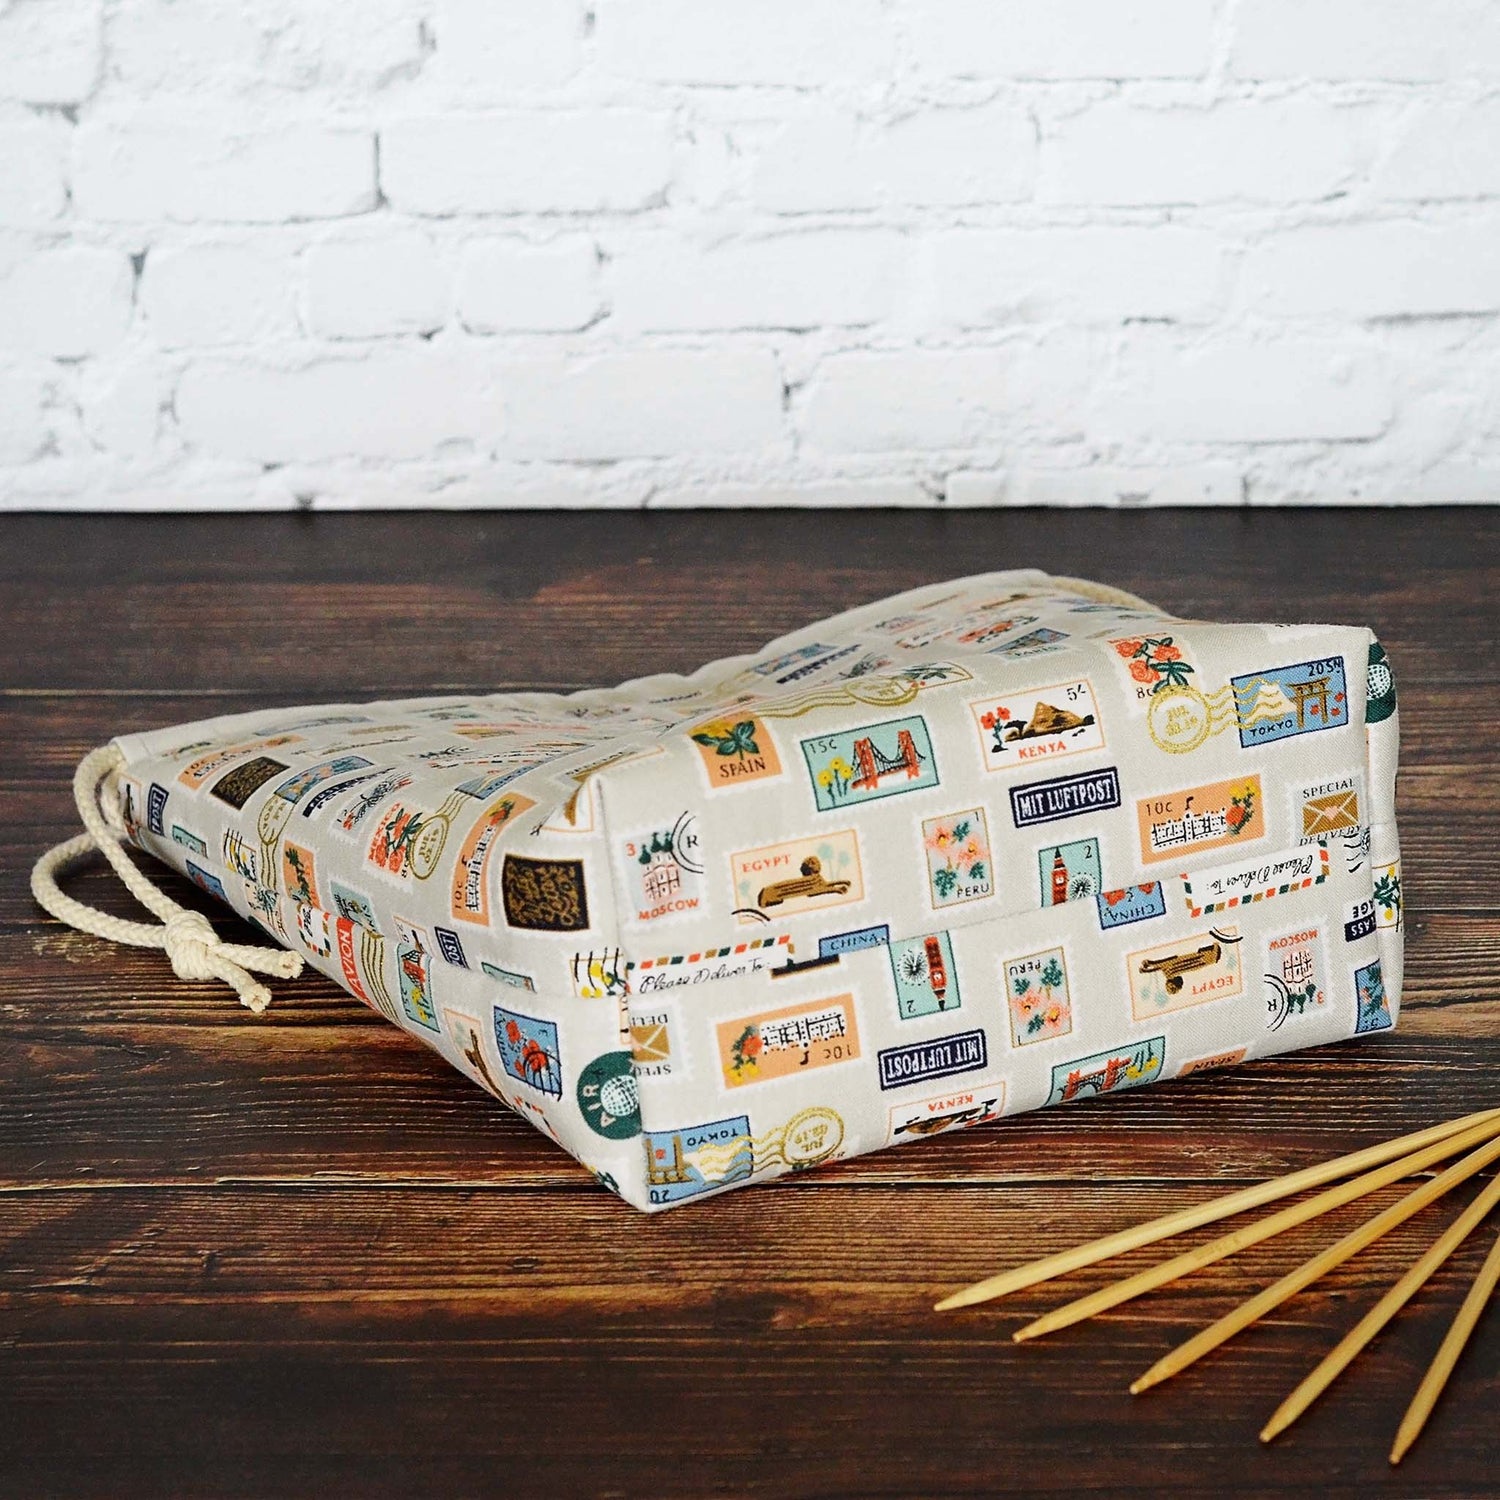 Postage Stamp patterned knitting project bag made from the Bon Voyage collection by Rifle Paper Co.  Made in Canada by Yellow Petal Handmade.